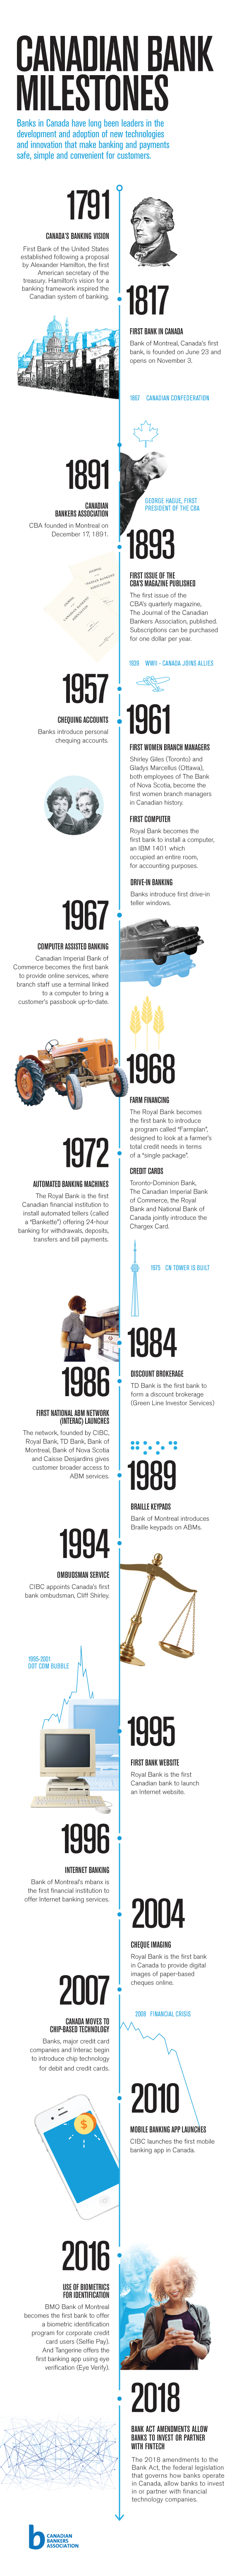 timeline depicting banking innovations over the last 125 years